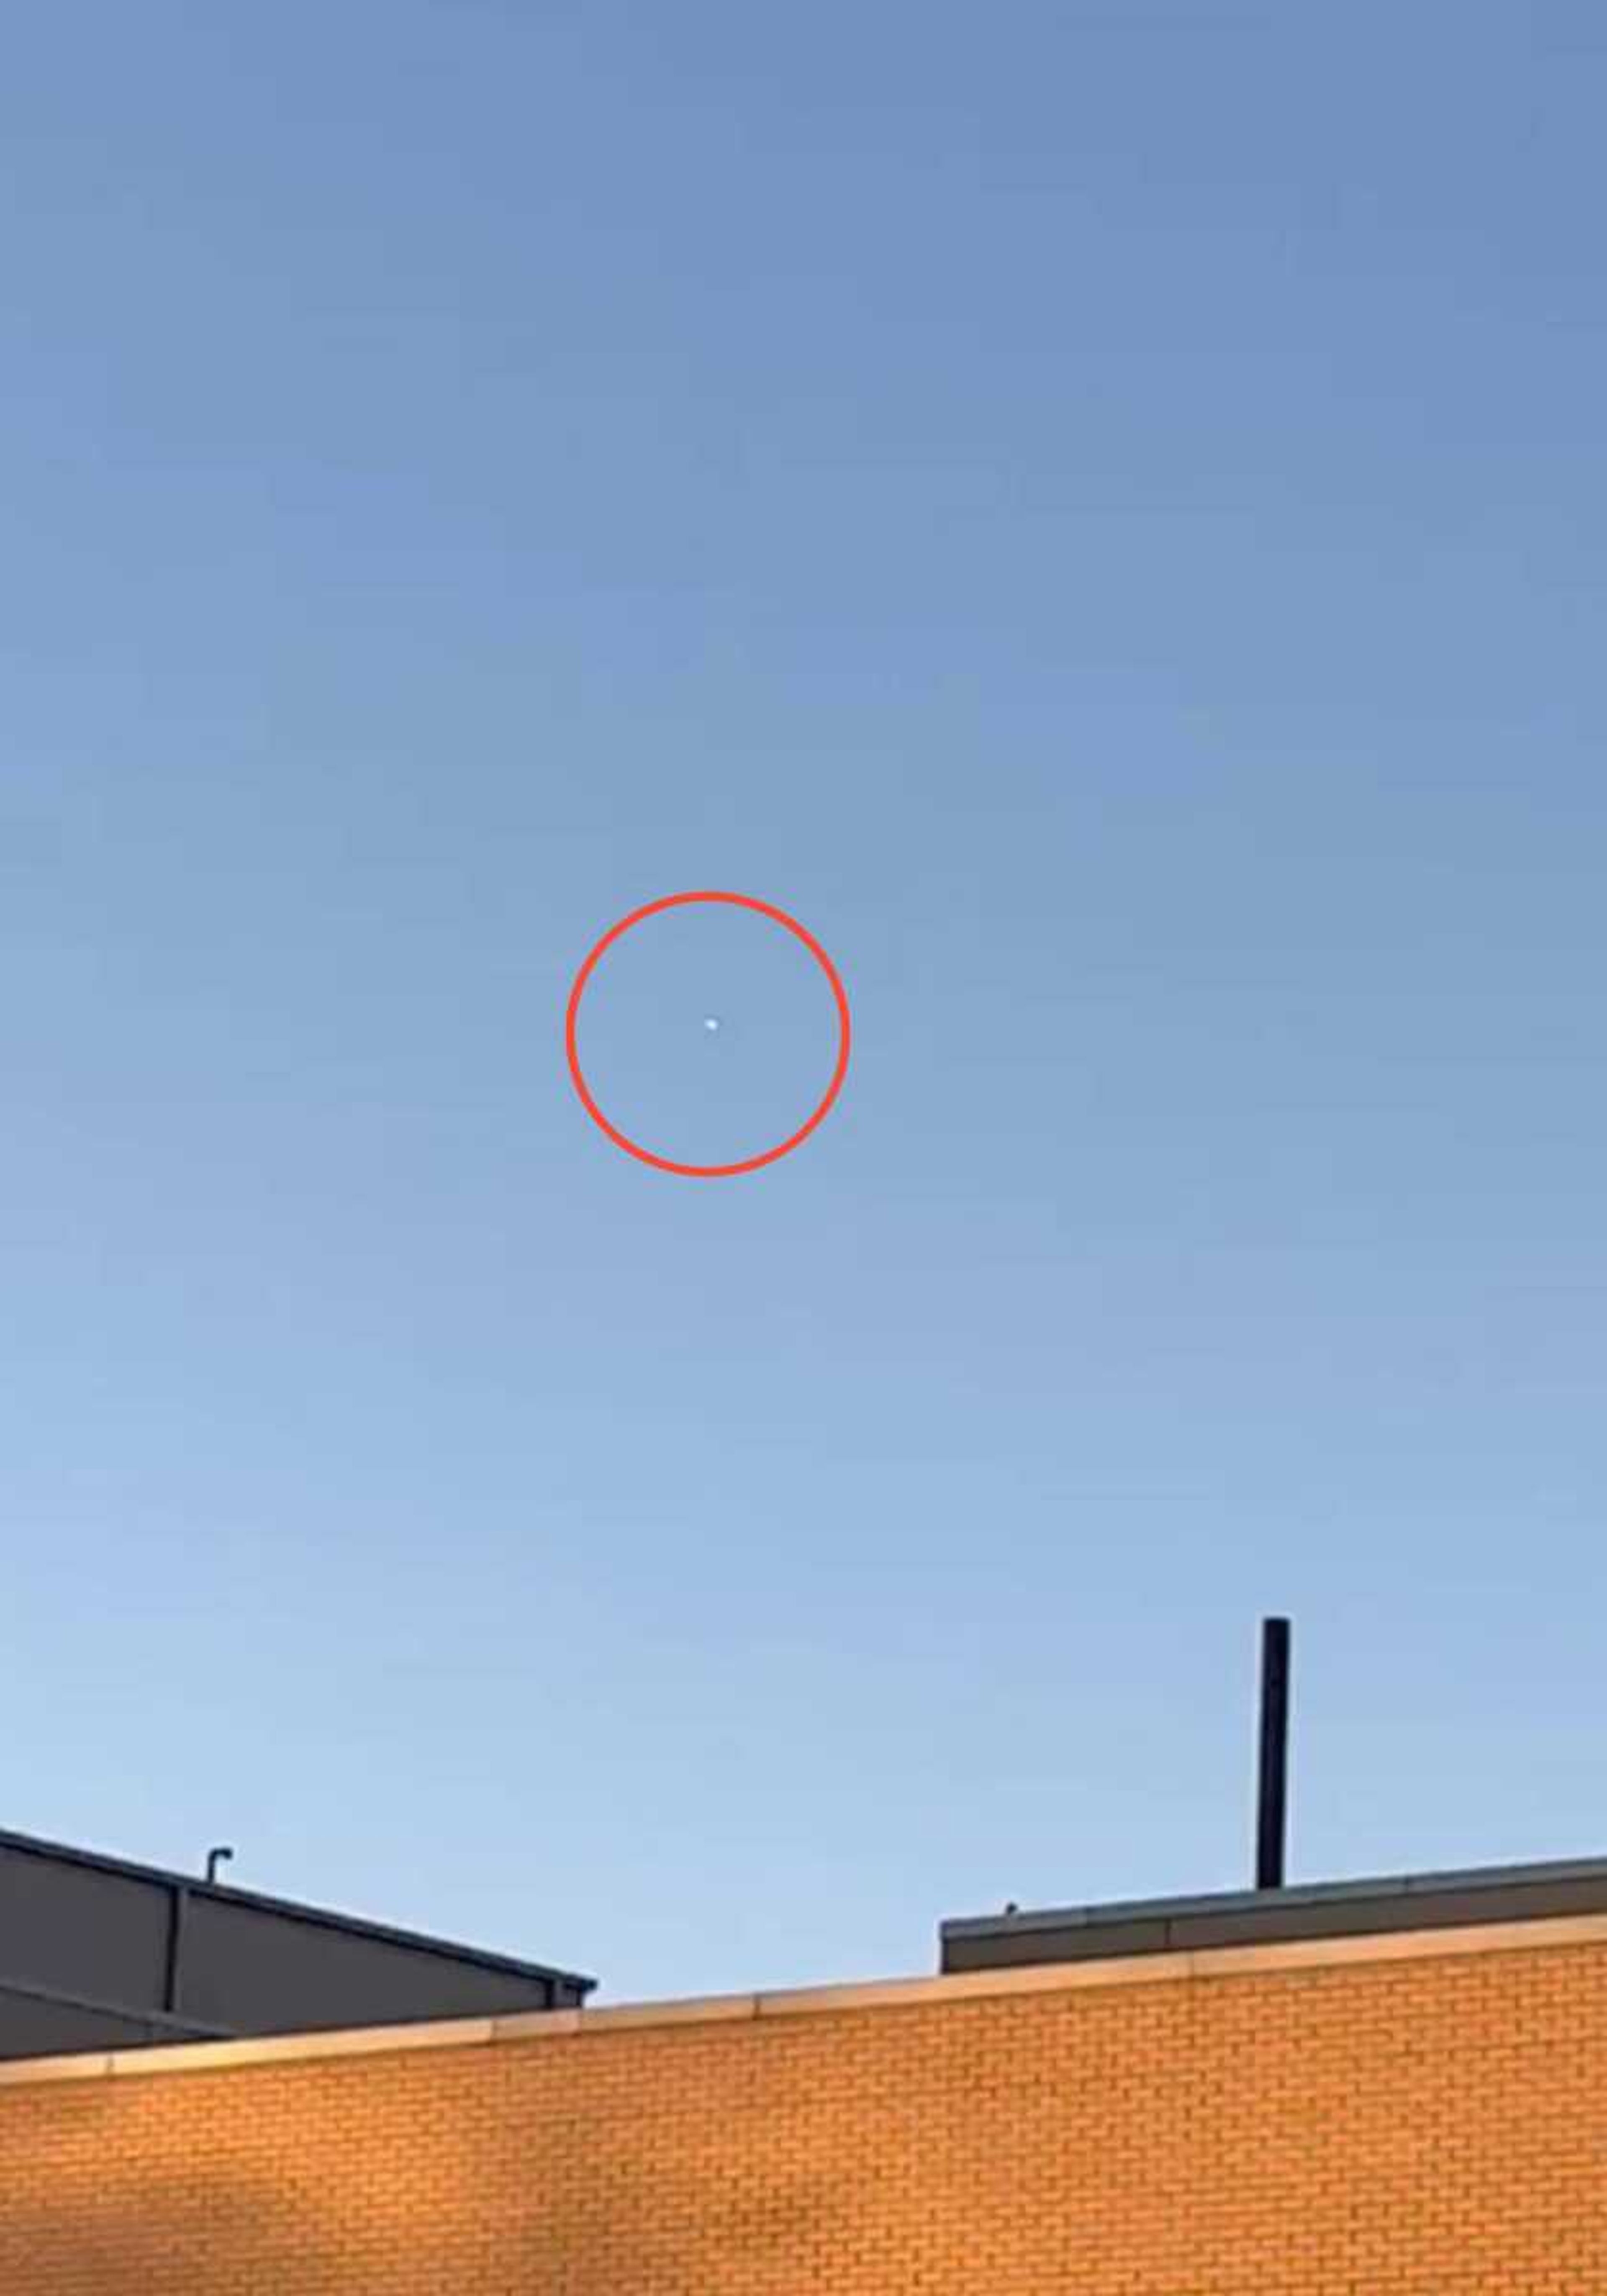 A suspected Chinese surveillance balloon can be seen traveling over Cape Girardeau at approximately 5:15 p.m. The balloon was spotted by Mass Media professor Sarah Cavanah, and she took a video of the balloon on Franklin Street behind Southeast Hospital.